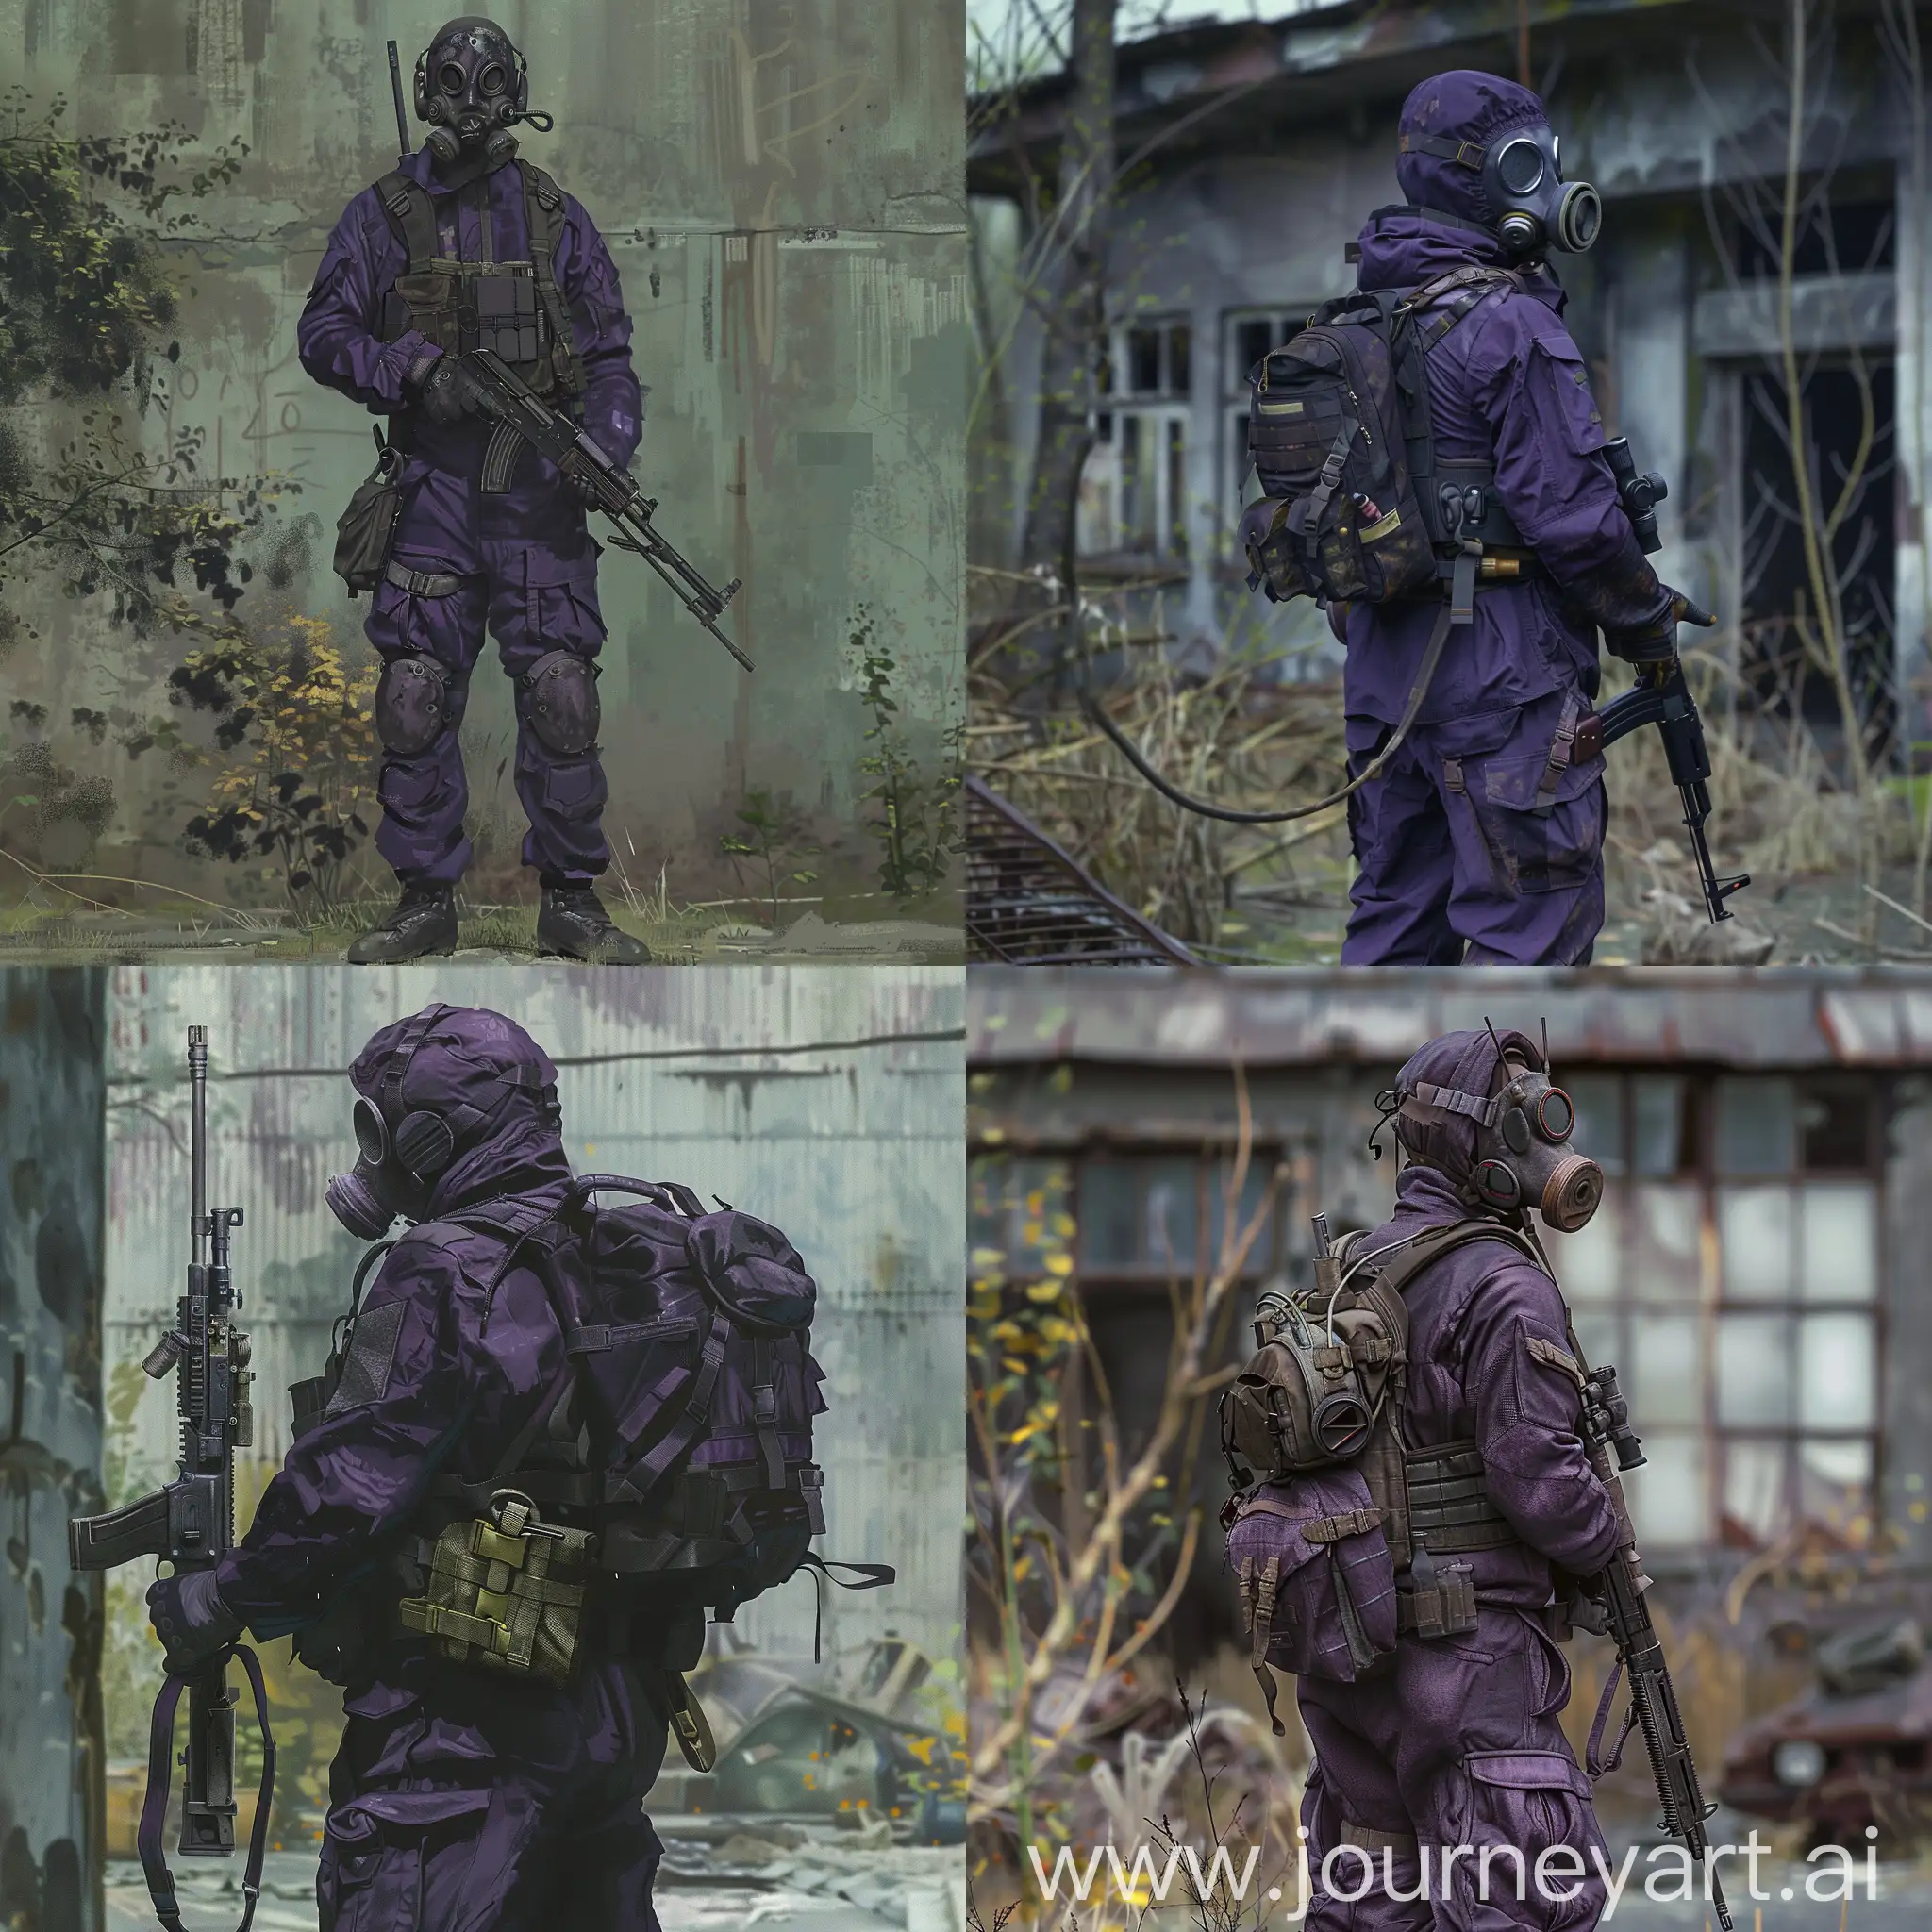 Concept art location for RPG game basic on the universe S.T.A.L.K.E.R. Shadow of Chernobyl, In the photo the mercenary is standing, Concept character art, dark purple military jumpsuit, gasmask on his face, small military backpack, military unloading on his body, sniper rifle in his hands, the main focus is on the location.